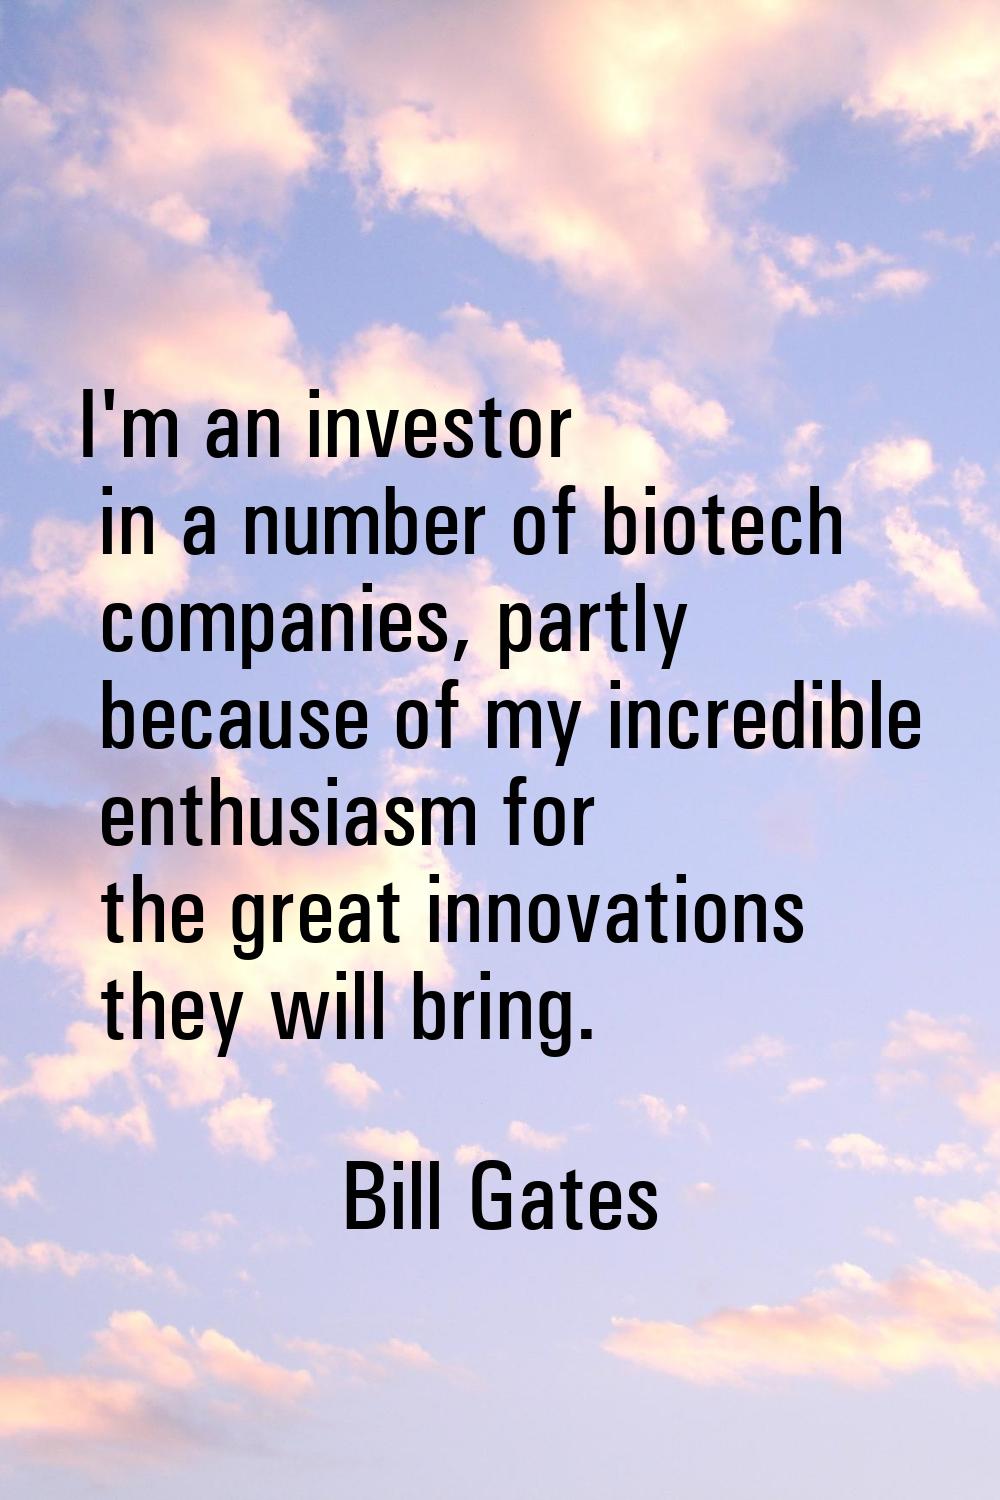 I'm an investor in a number of biotech companies, partly because of my incredible enthusiasm for th